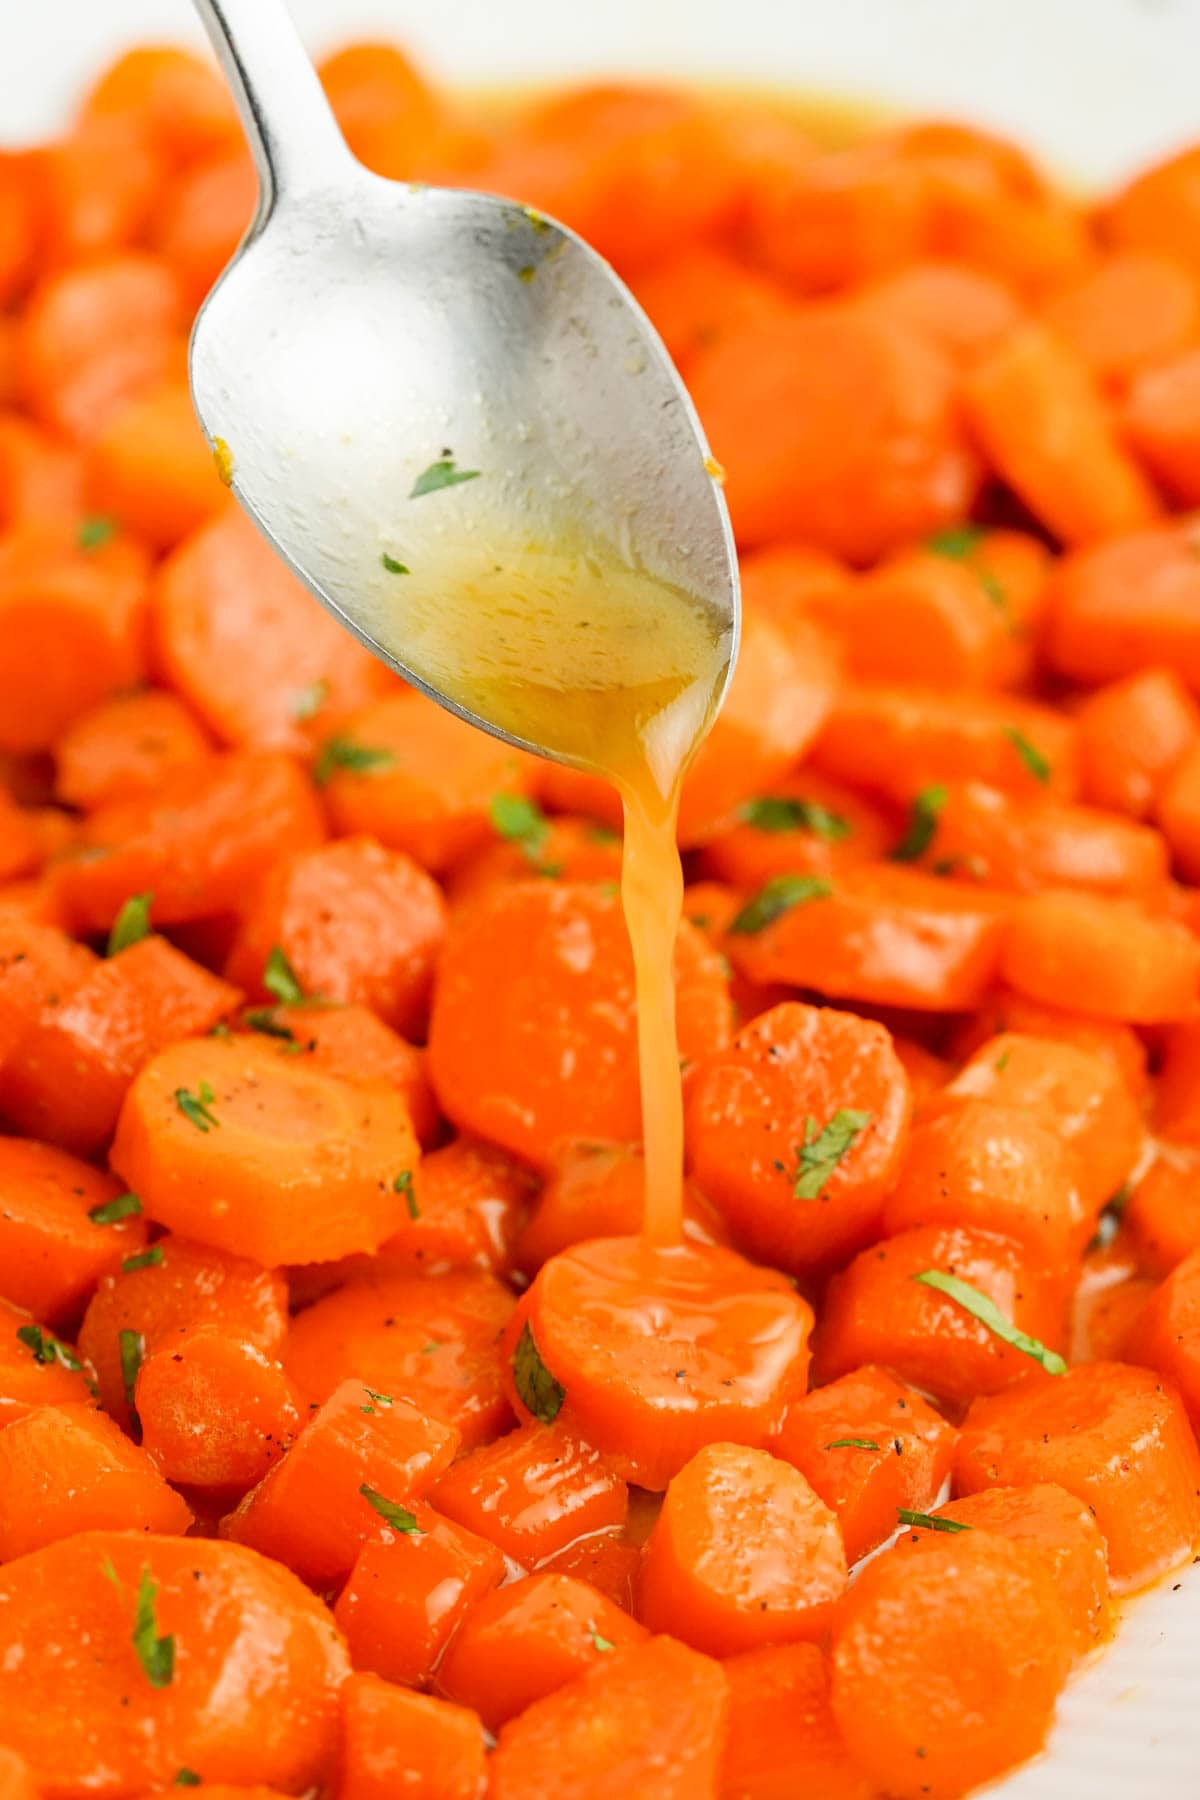 Sliced carrots being drizzled with brown sugar sauce.